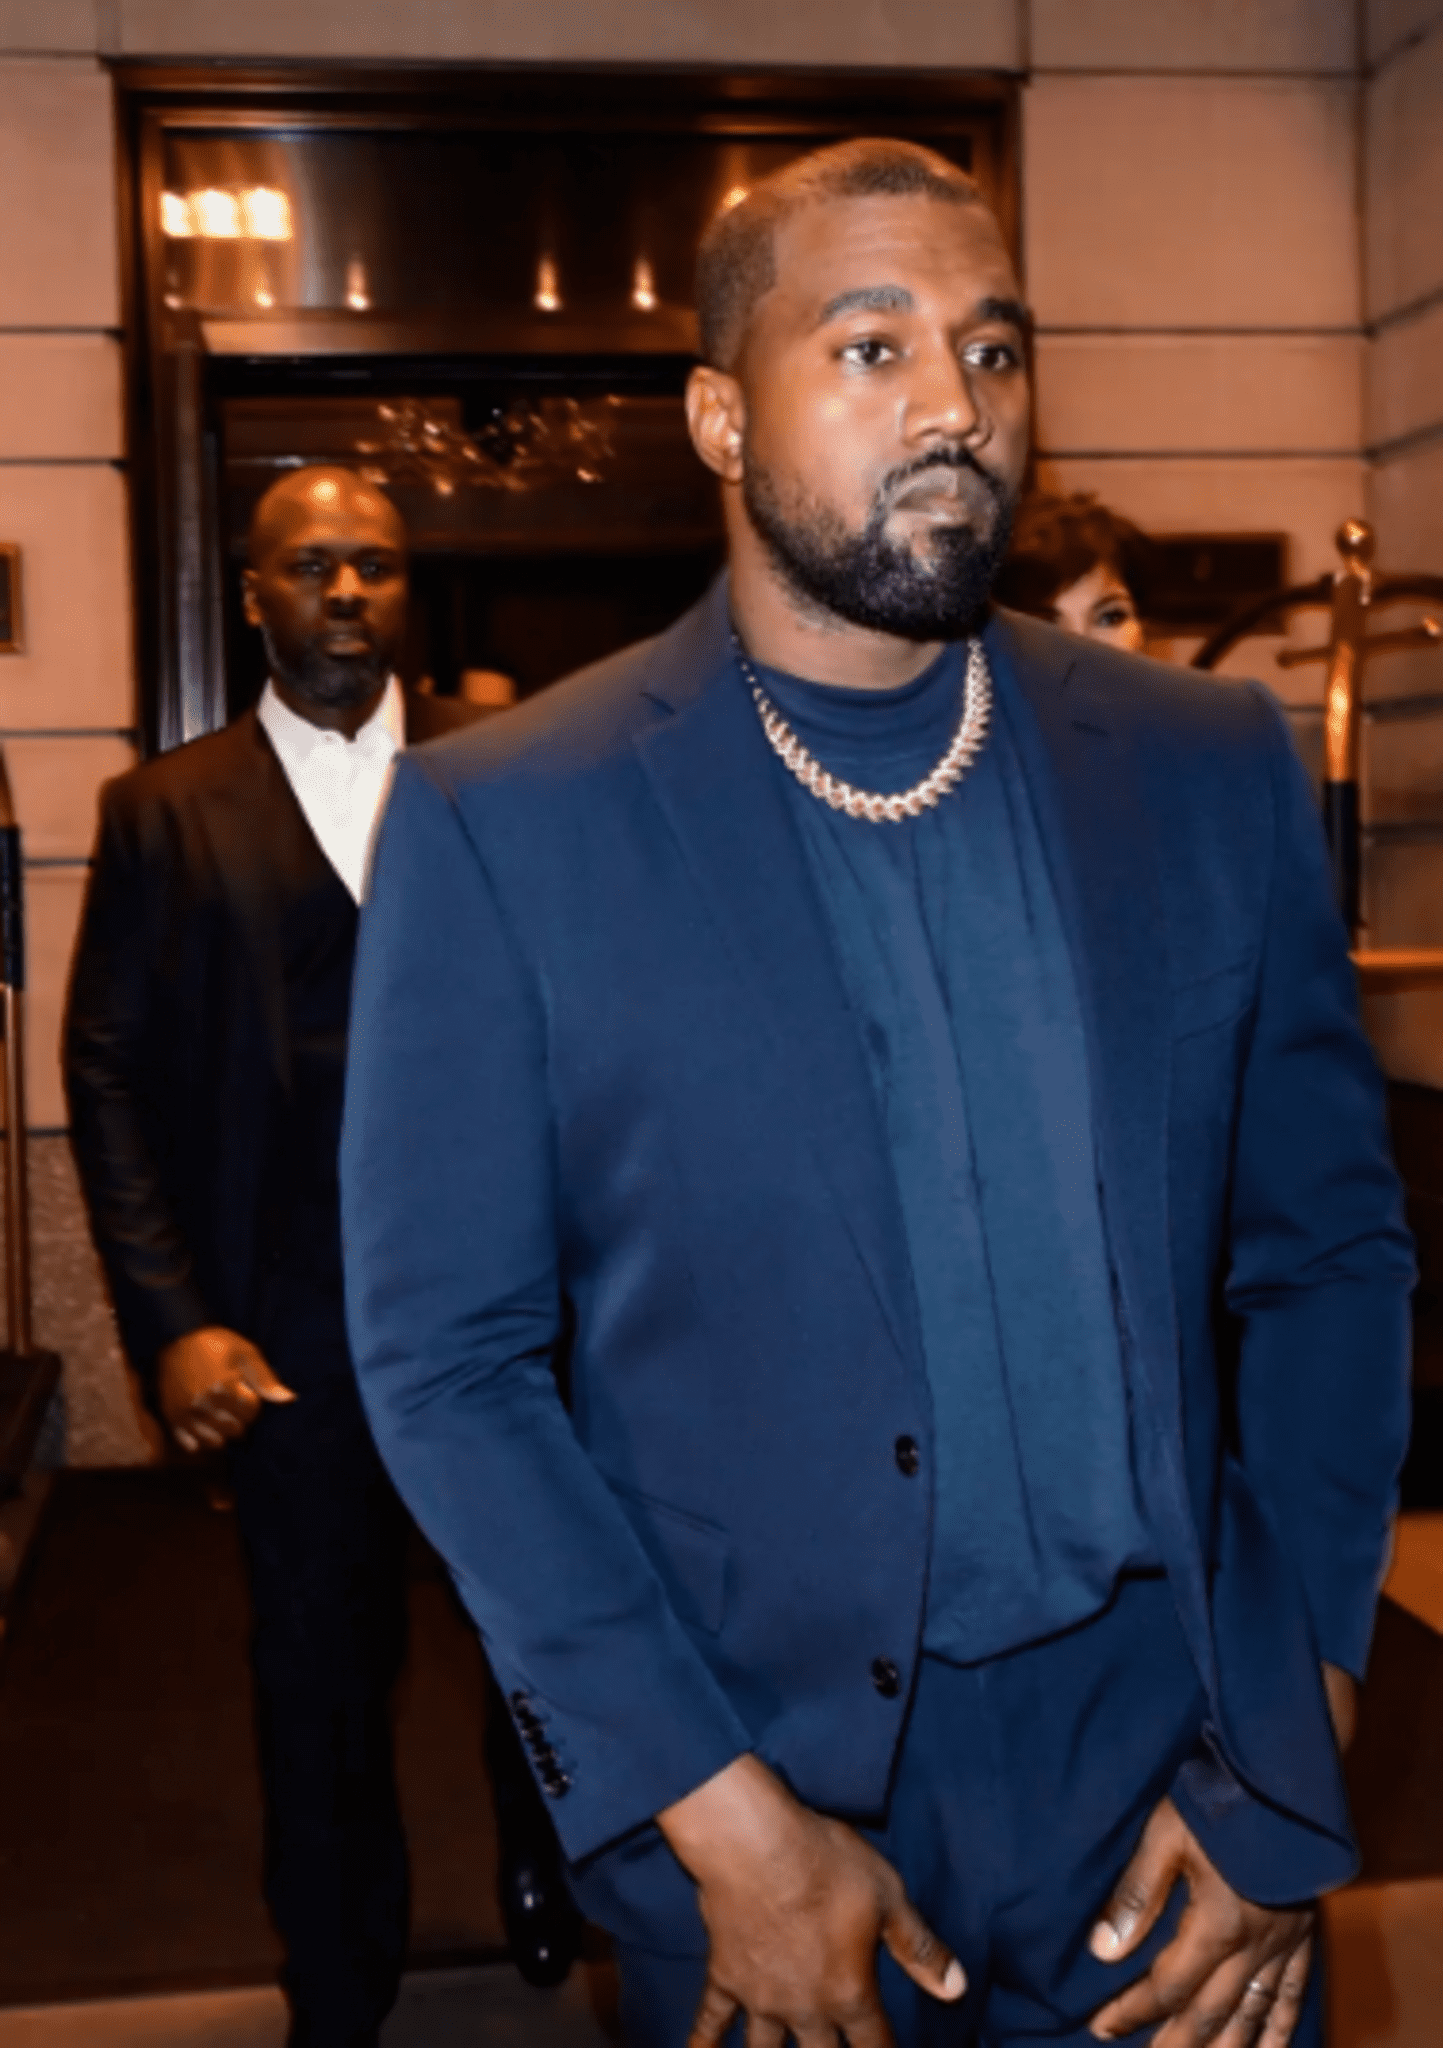 On Social Media, Kanye West Disclosed An Addiction To Pornography